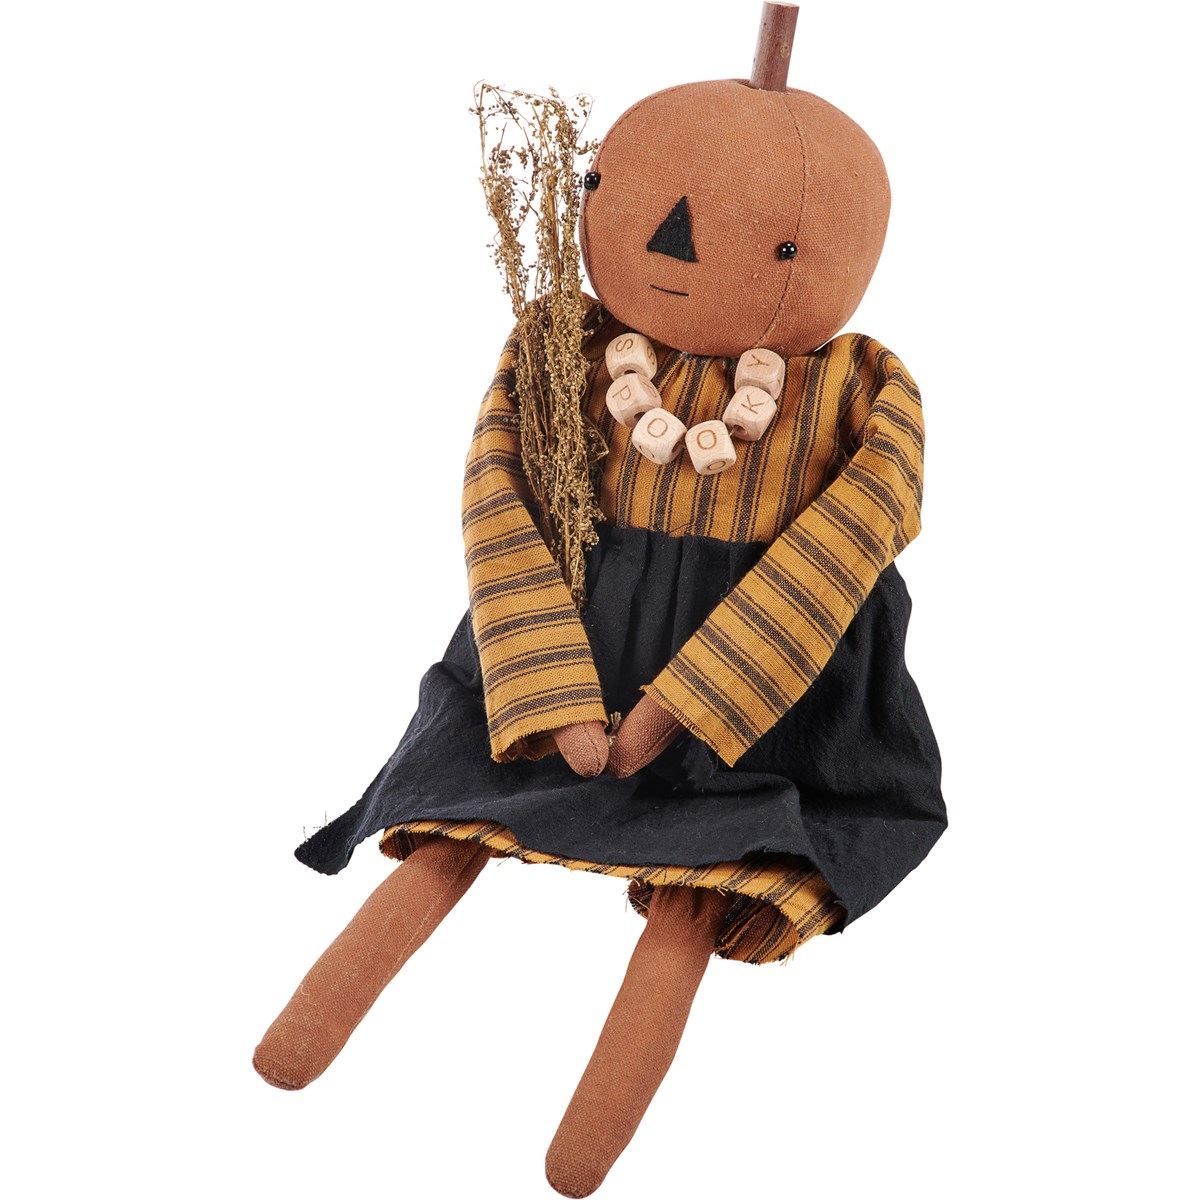 Spooky Sally Doll - Cotton, Wood, Wire, Plastic, String